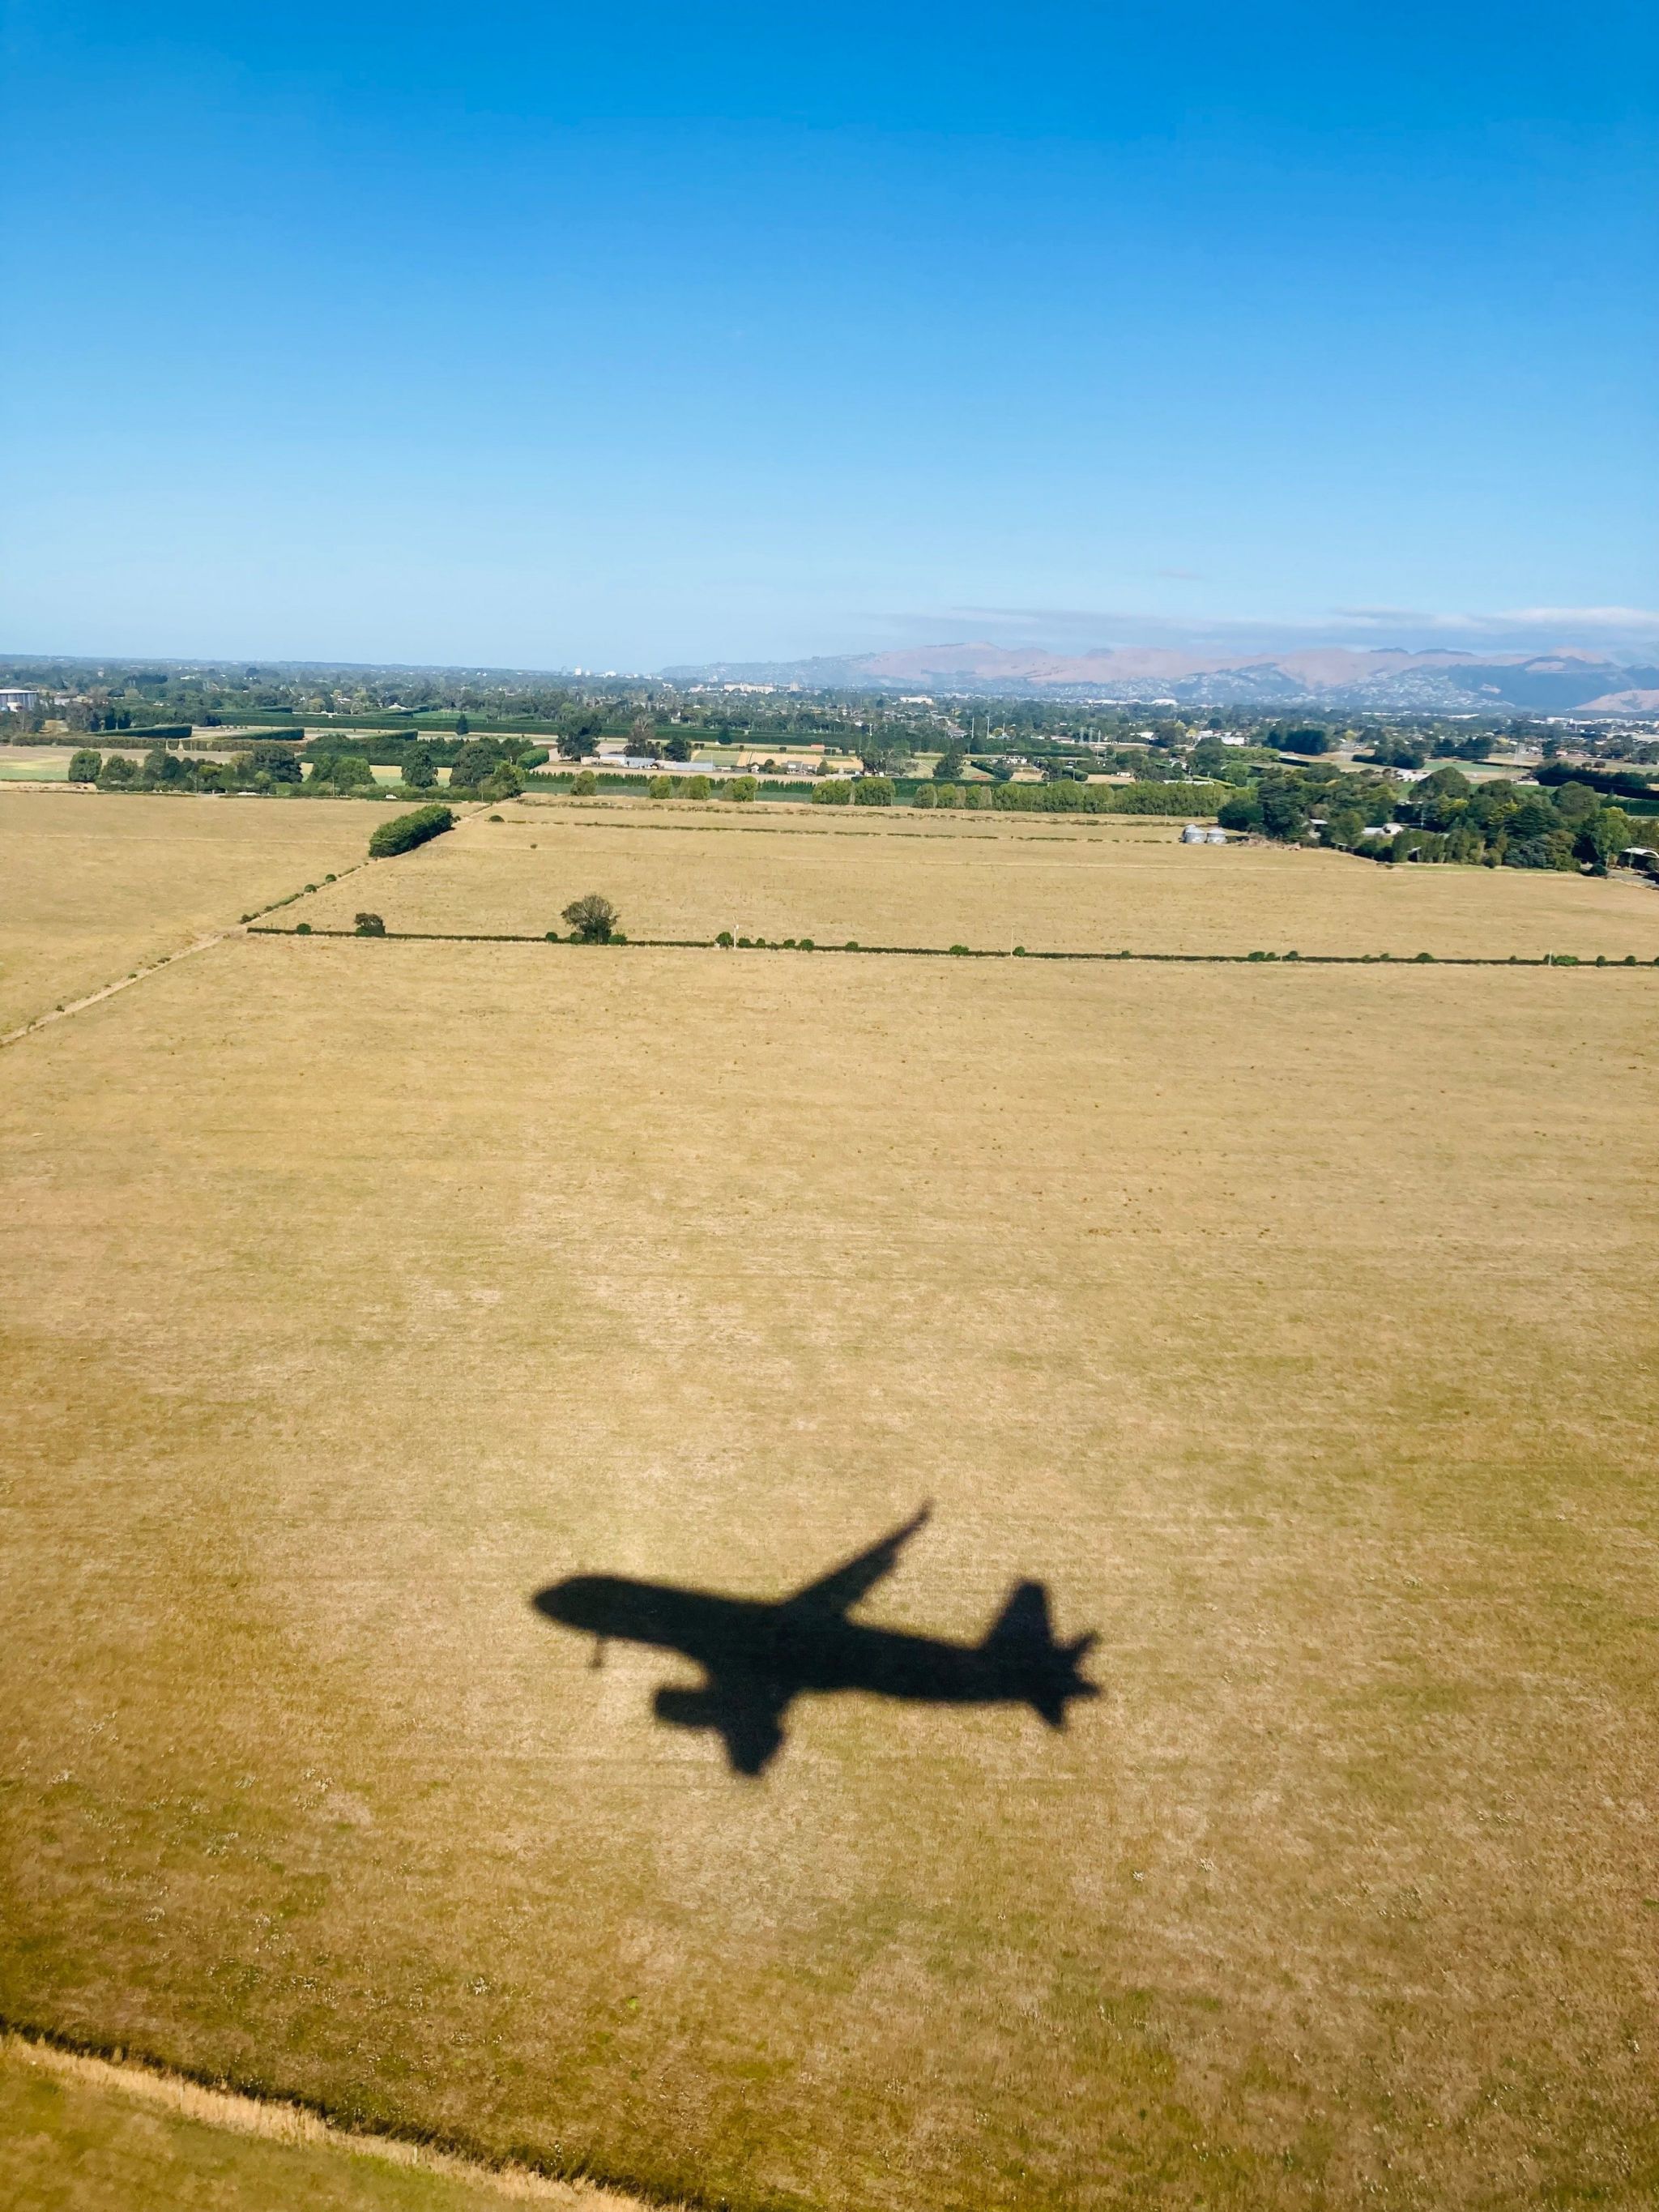 The shadow of an aeroplane as it flies over a field